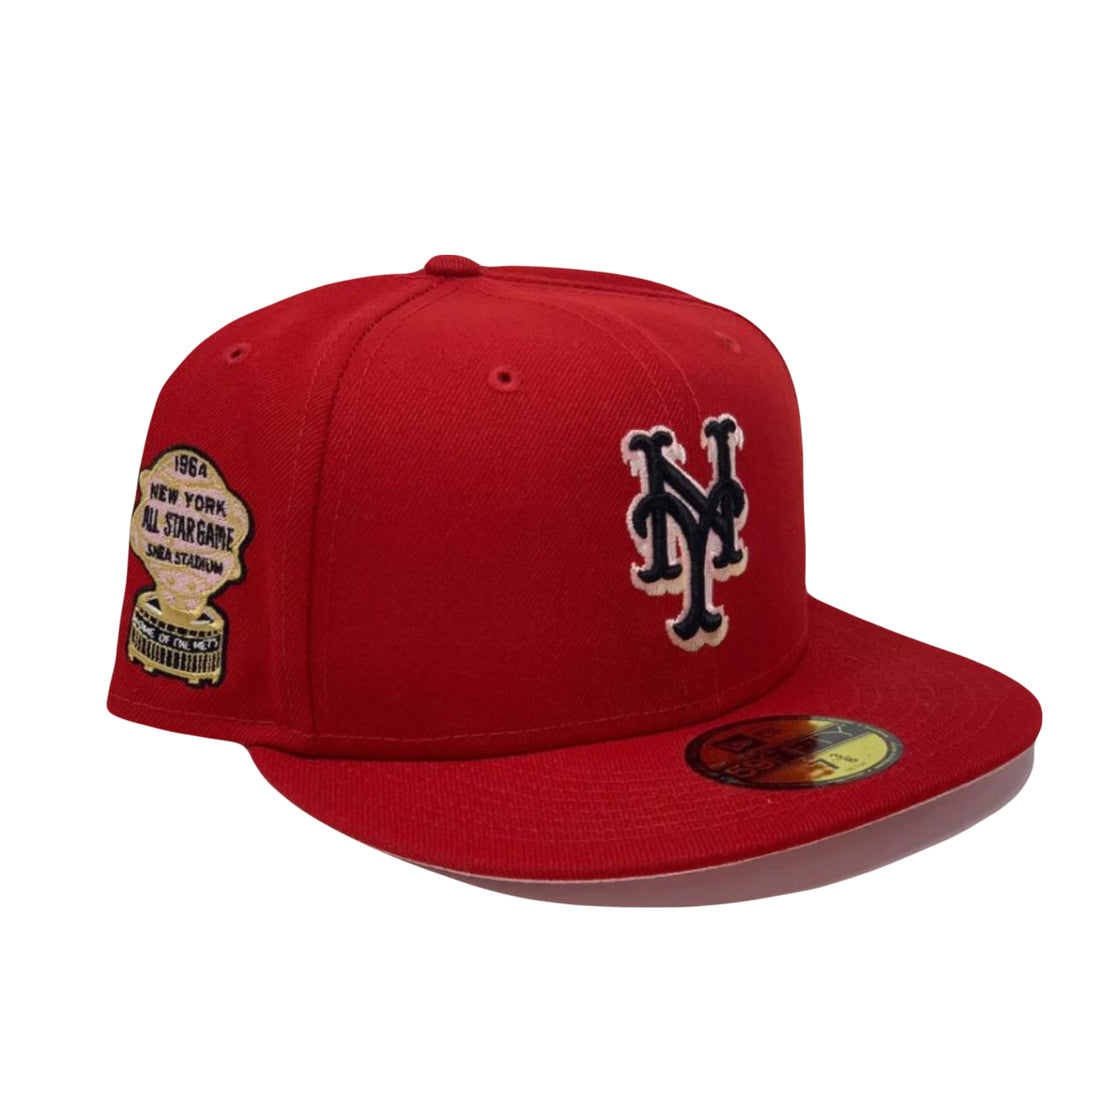 New York Mets 1964 All Star Game Red Pink Brim New Era Fitted Hat